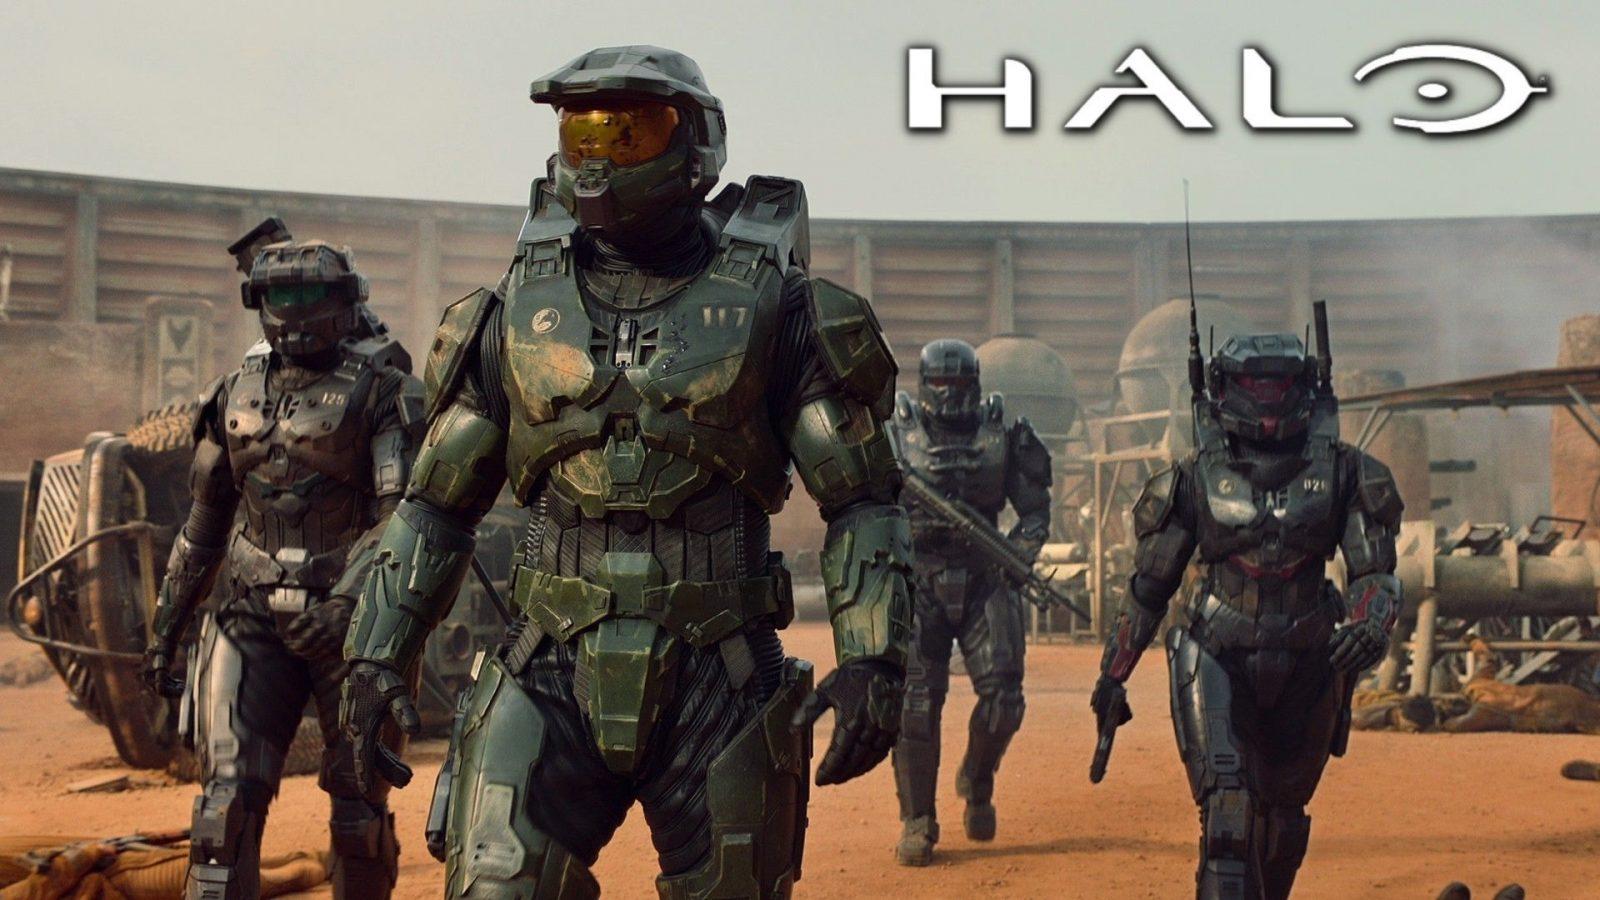 unsc walking together in halo tv series